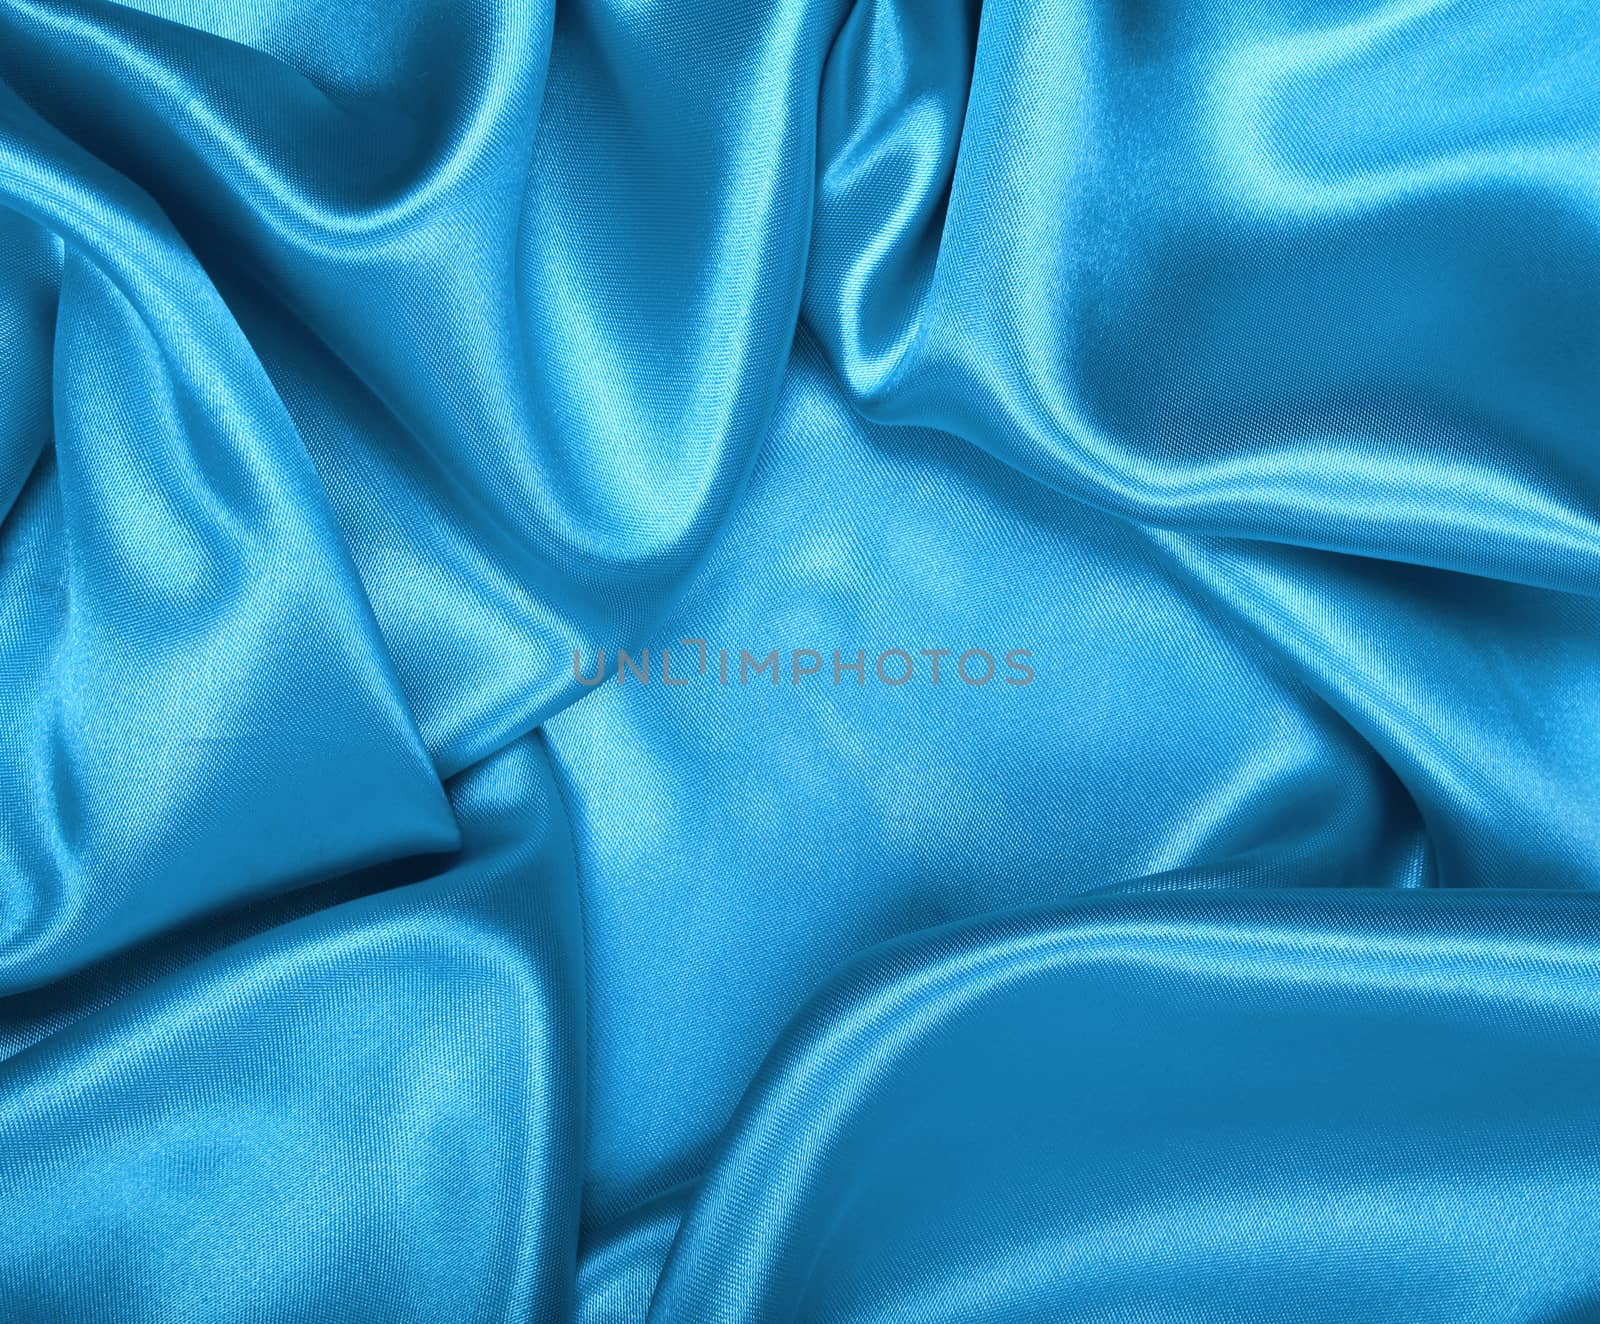 Smooth elegant blue silk or satin can use as background 